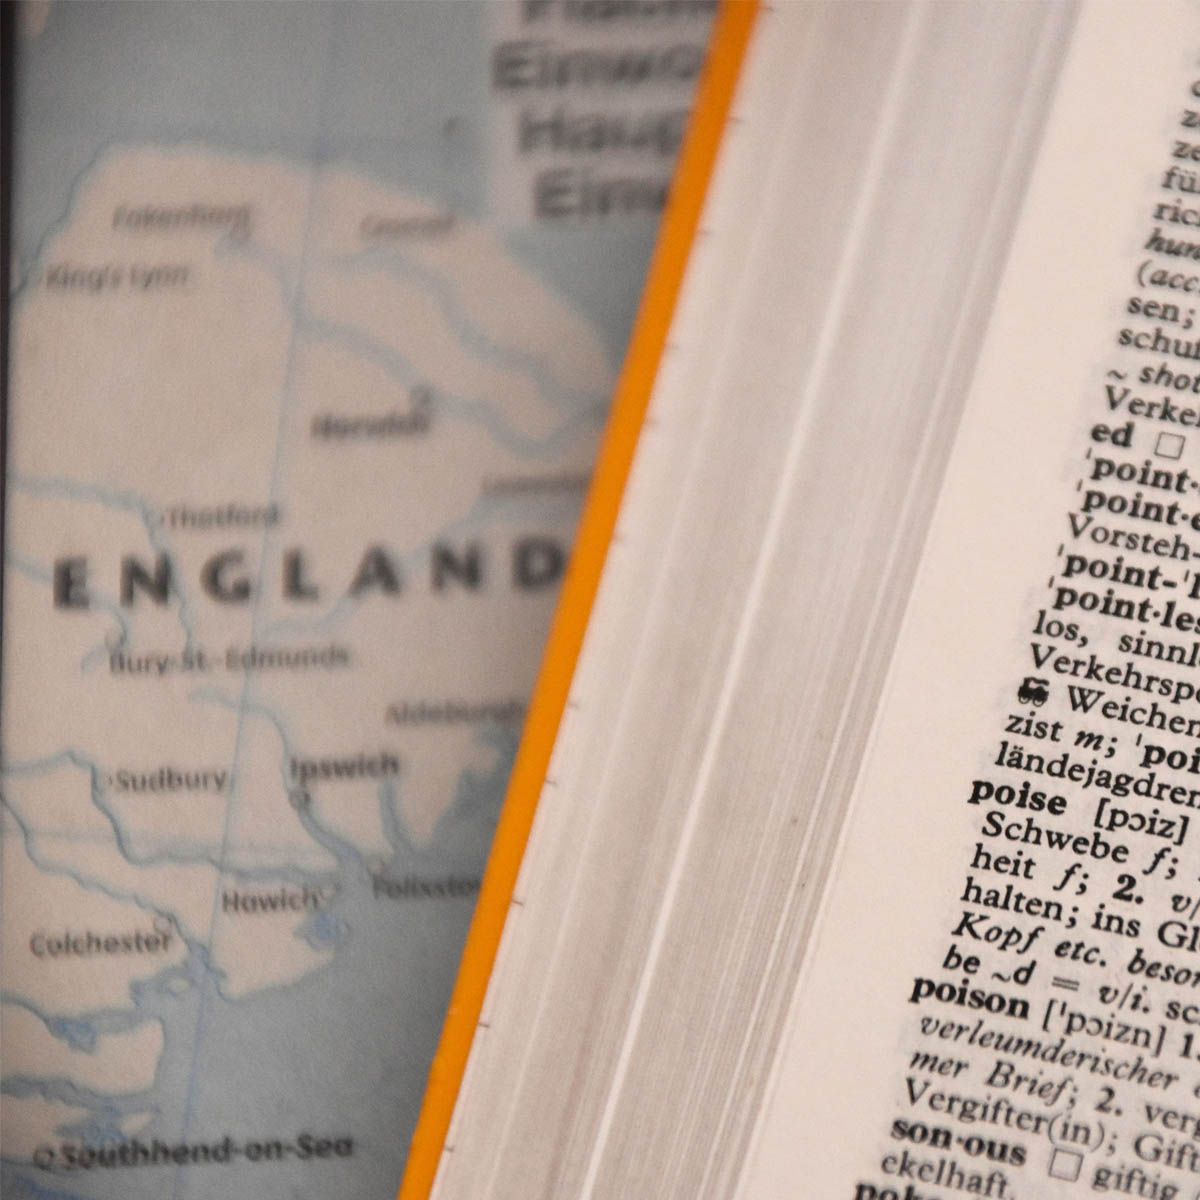 An English map and book